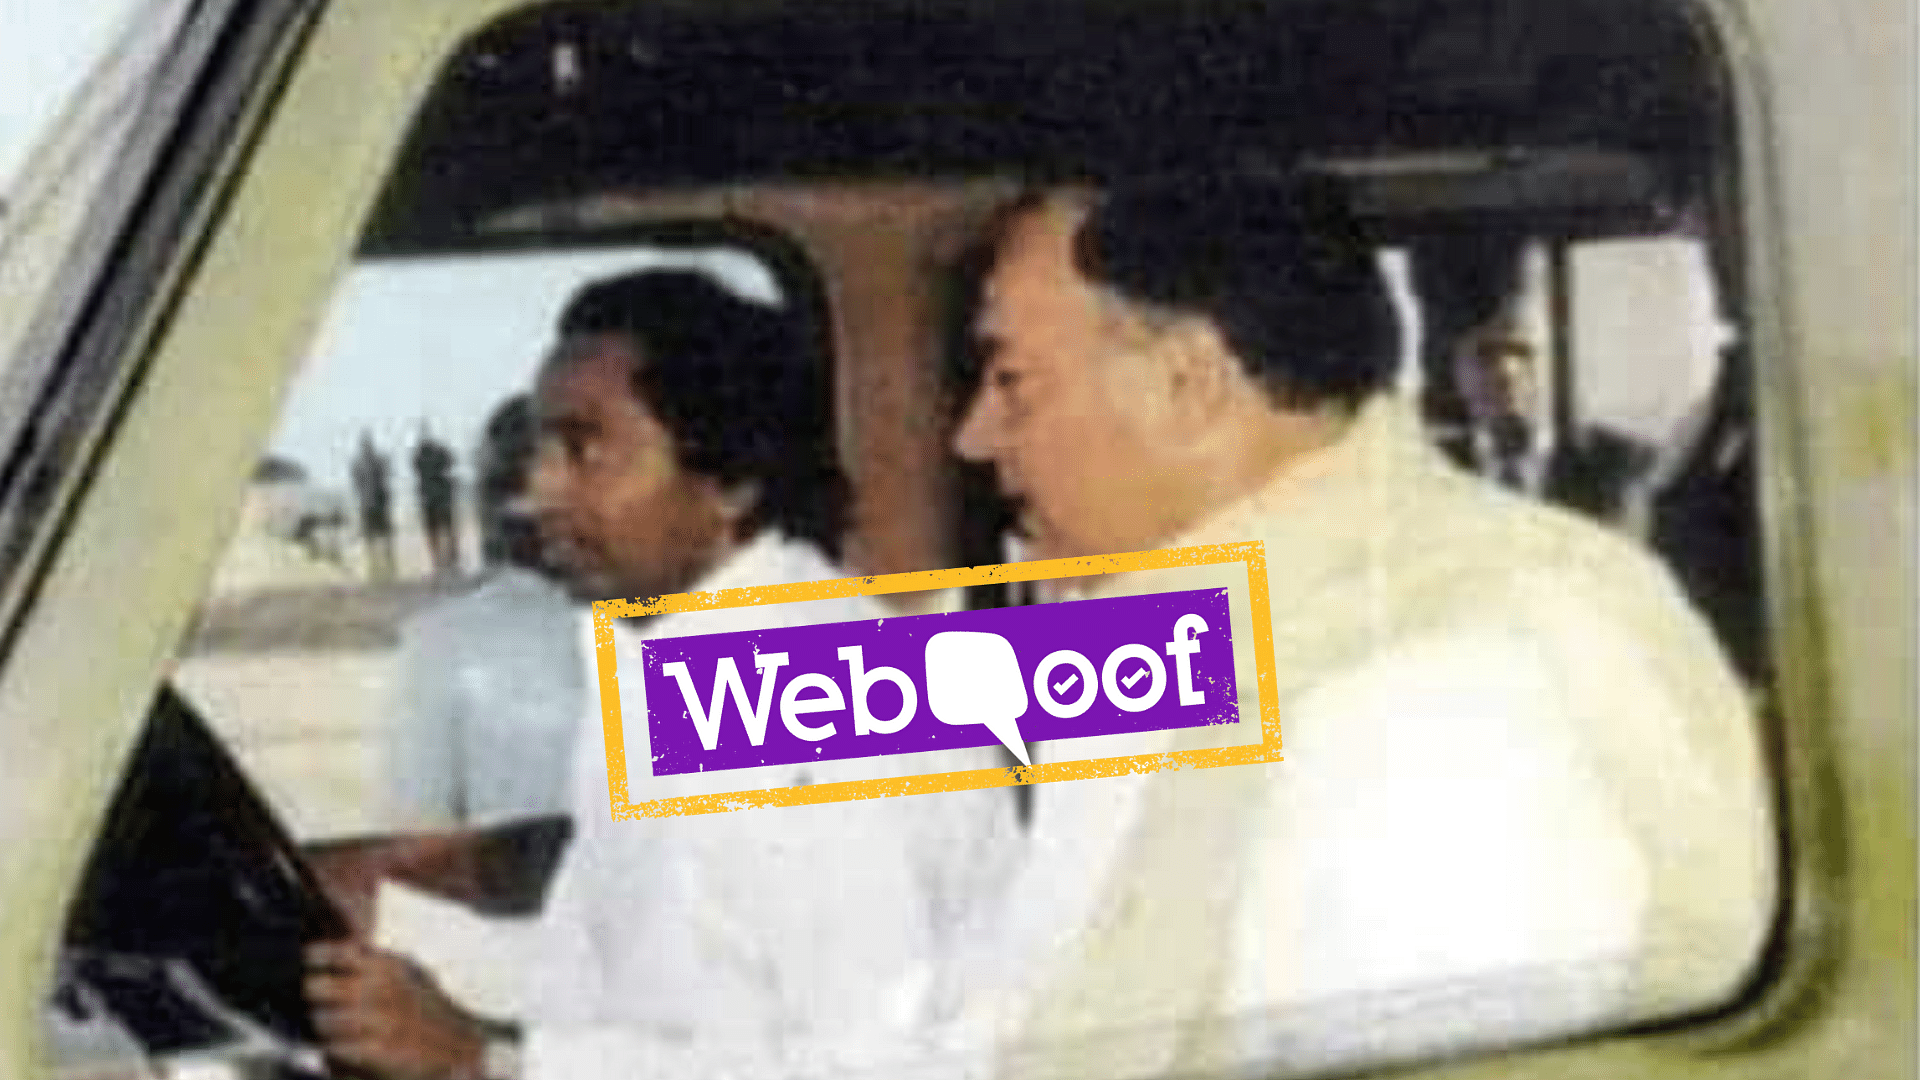 A viral image falsely claimed that MP Chief Minister Kamal Nath was late Rajiv Gandhi’s driver.